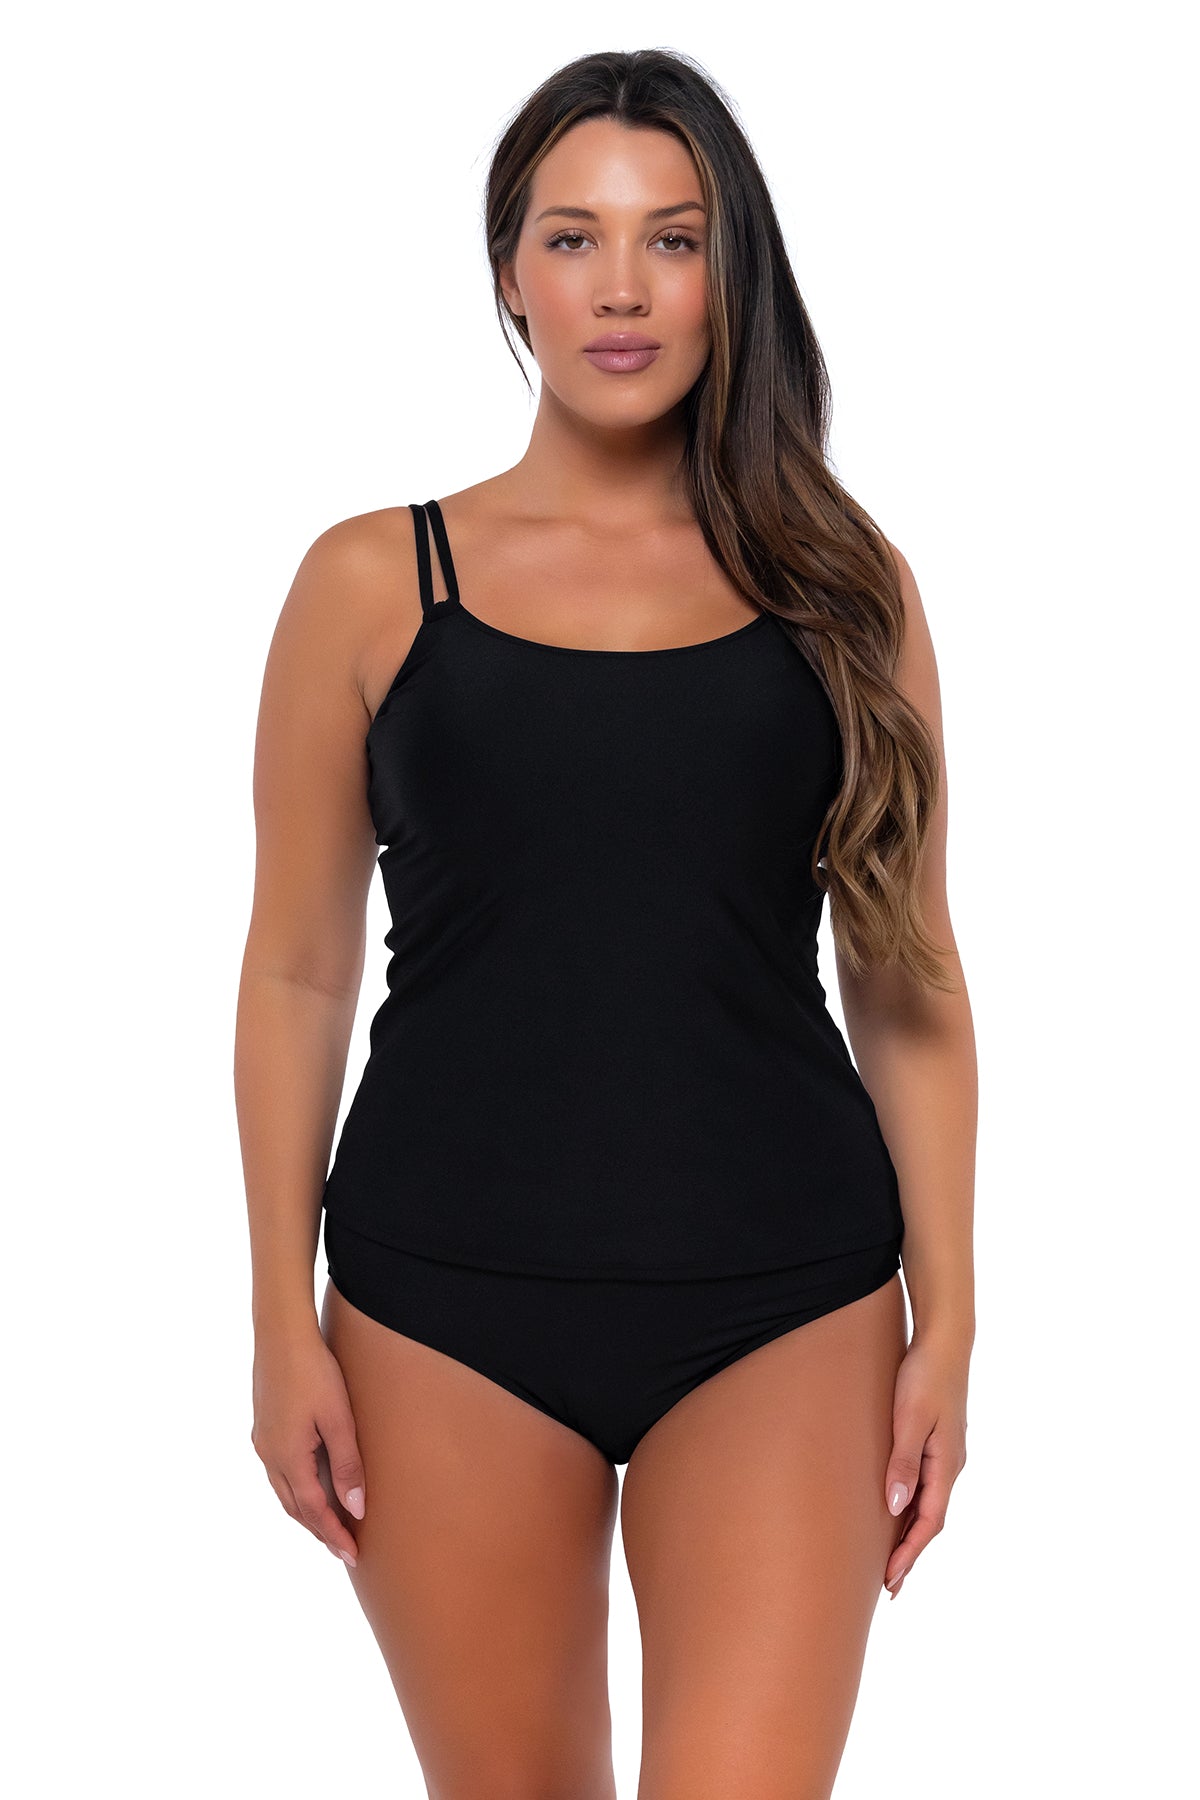 Sunsets Black Halter Tankini Top D-DD Cups & Reviews